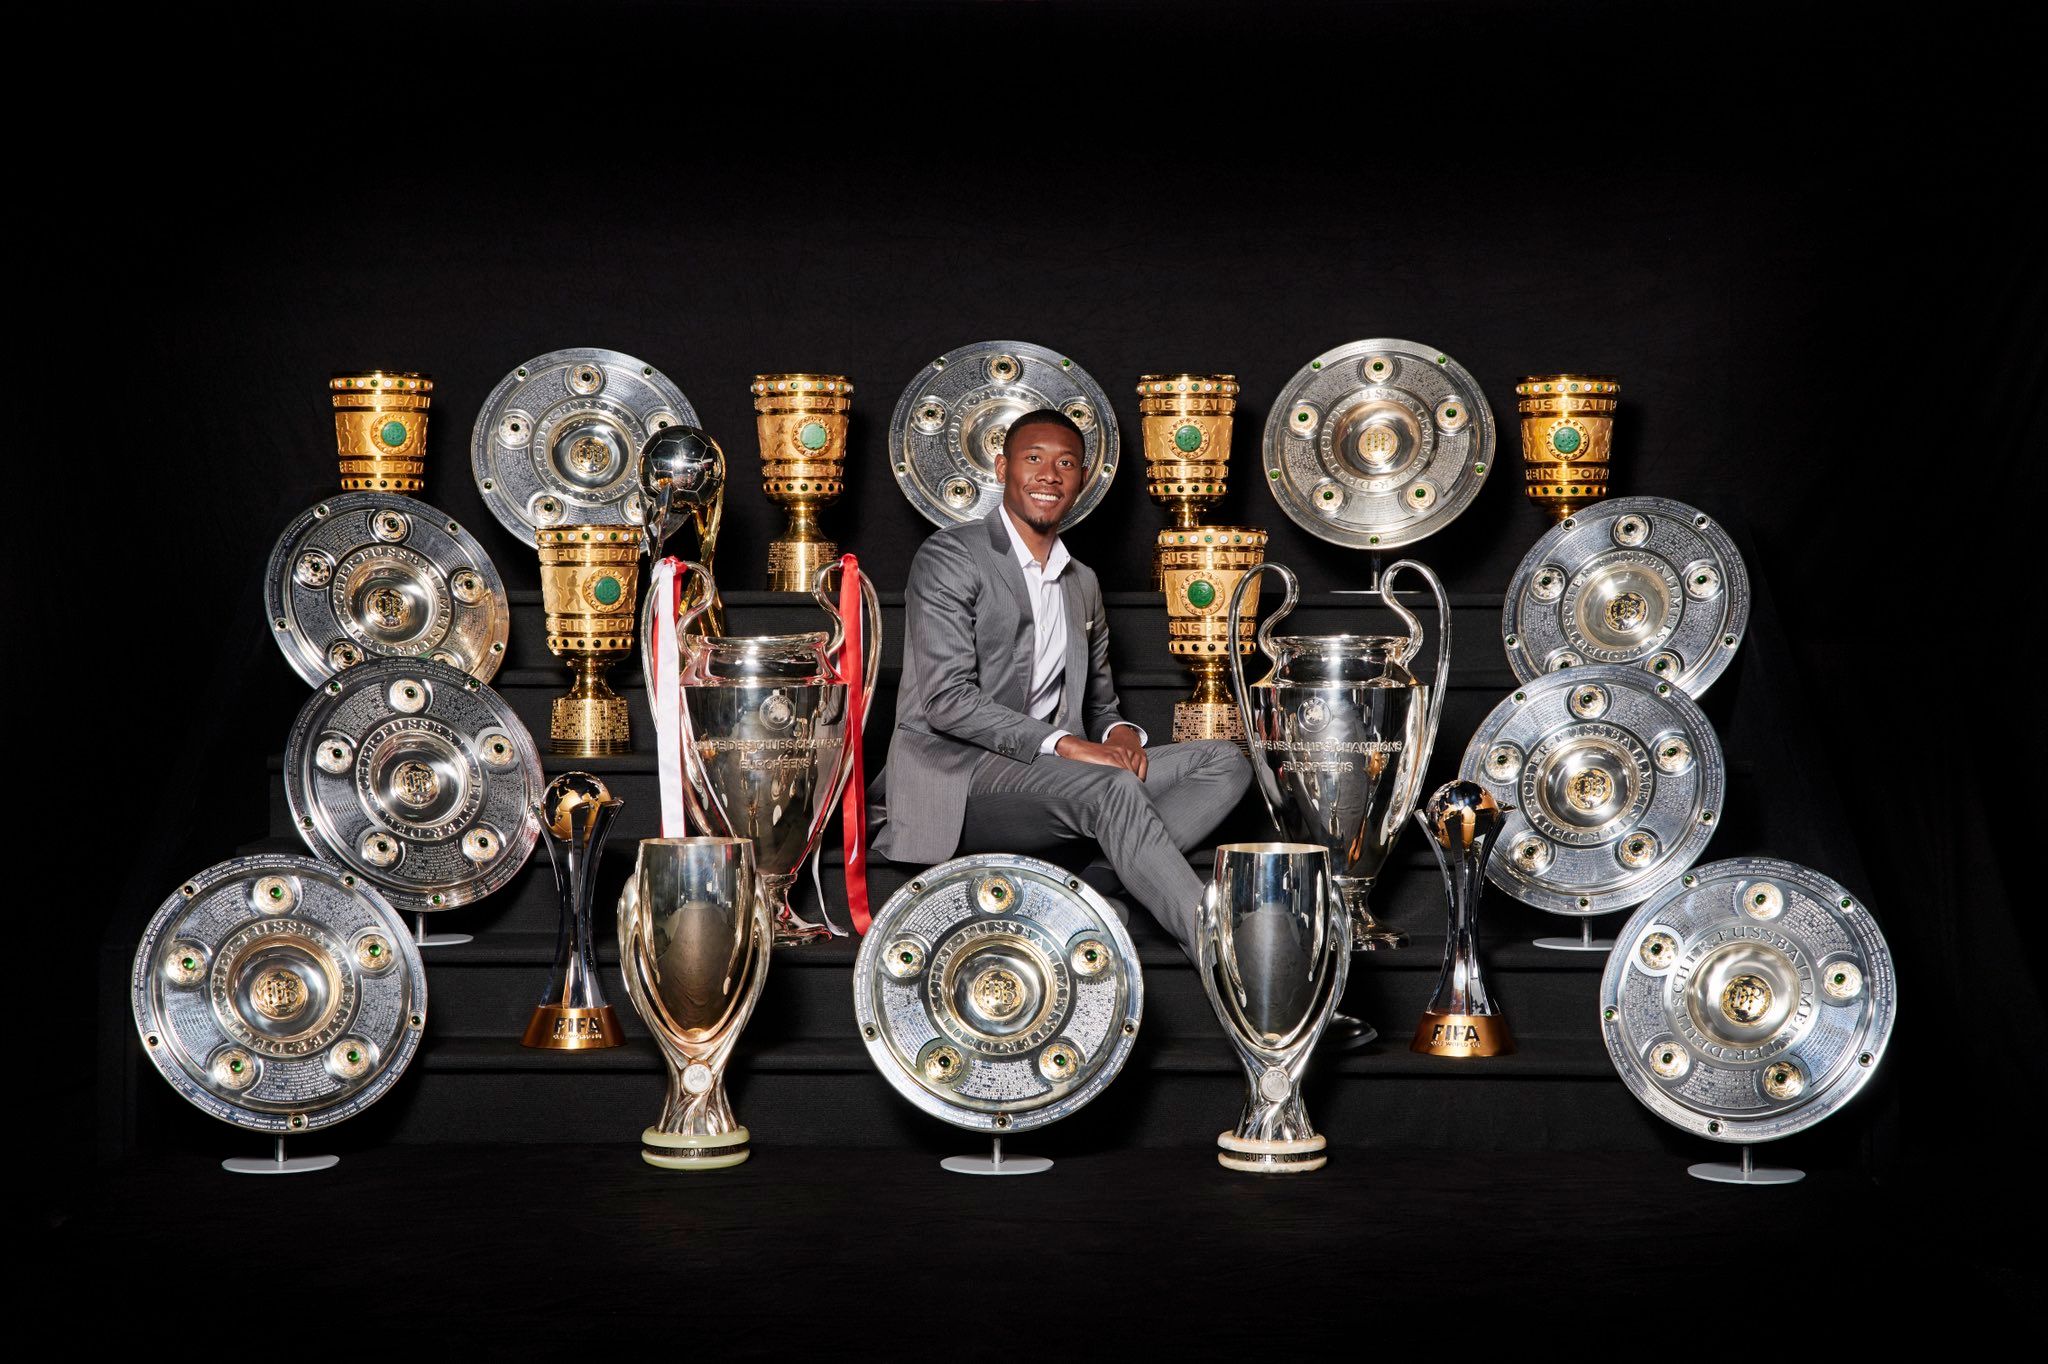 David Alaba signs for Real Madrid after leaving Bayern Munich